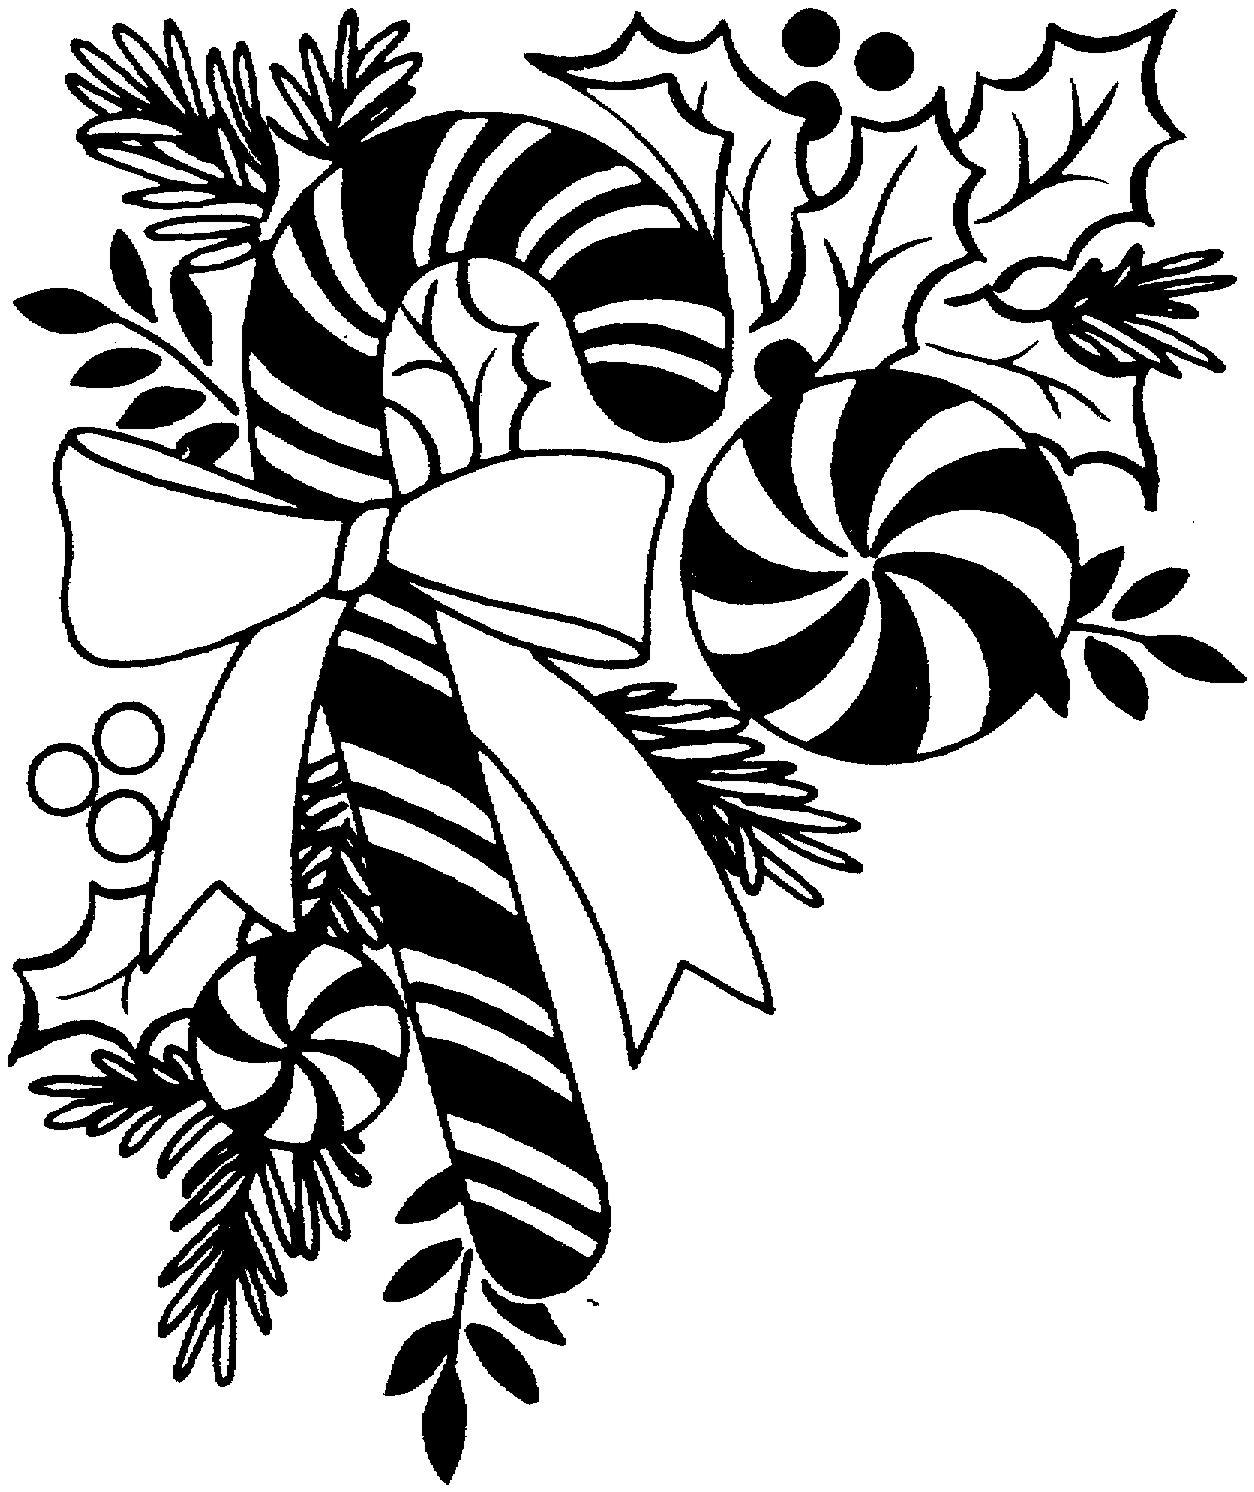 merry christmas clip art words black and white